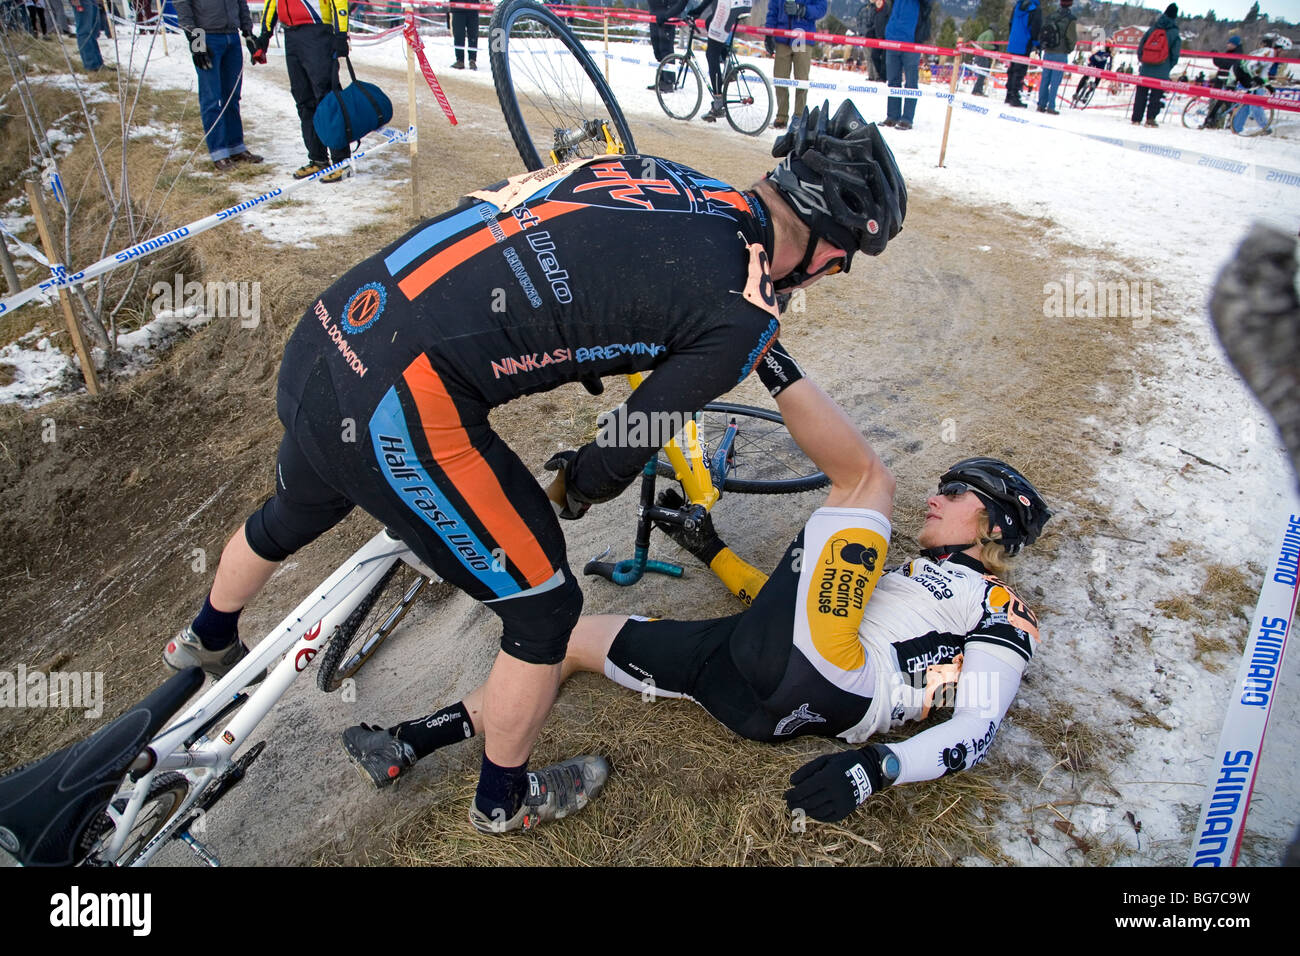 Cross racers on bicycles take part in the USA Cyclocross National Championships in Bend, Oregon on a cold, snowy track. Stock Photo